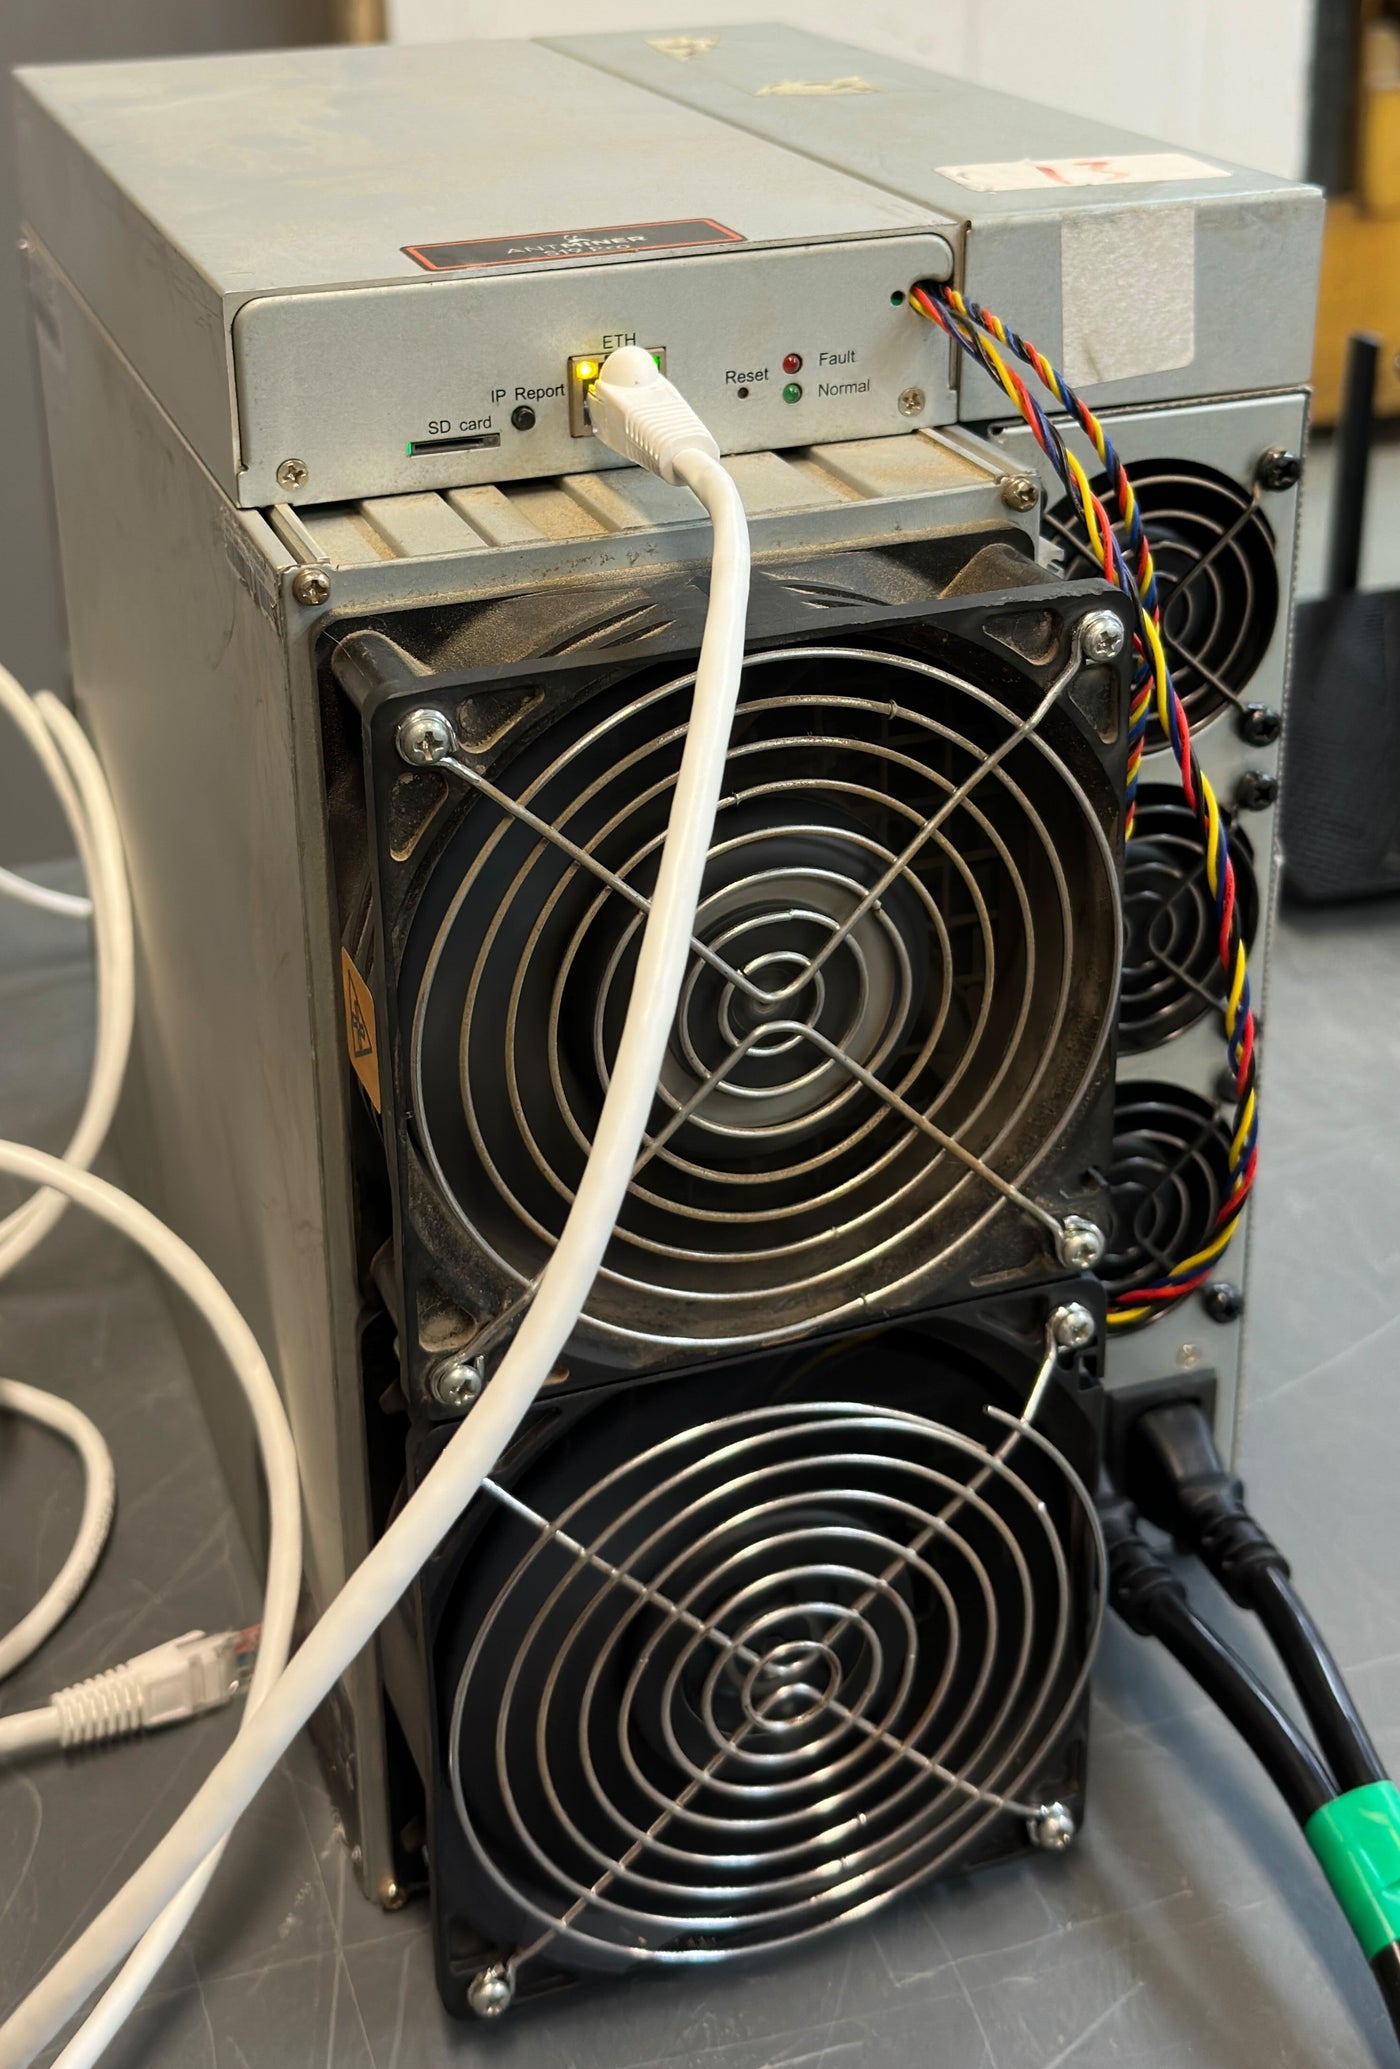 $.085 Hosting - Split Shares Beta - USED Bitmain Antminer S19 Pro 110 TH/s HQDZ67ABAJCJH02A8